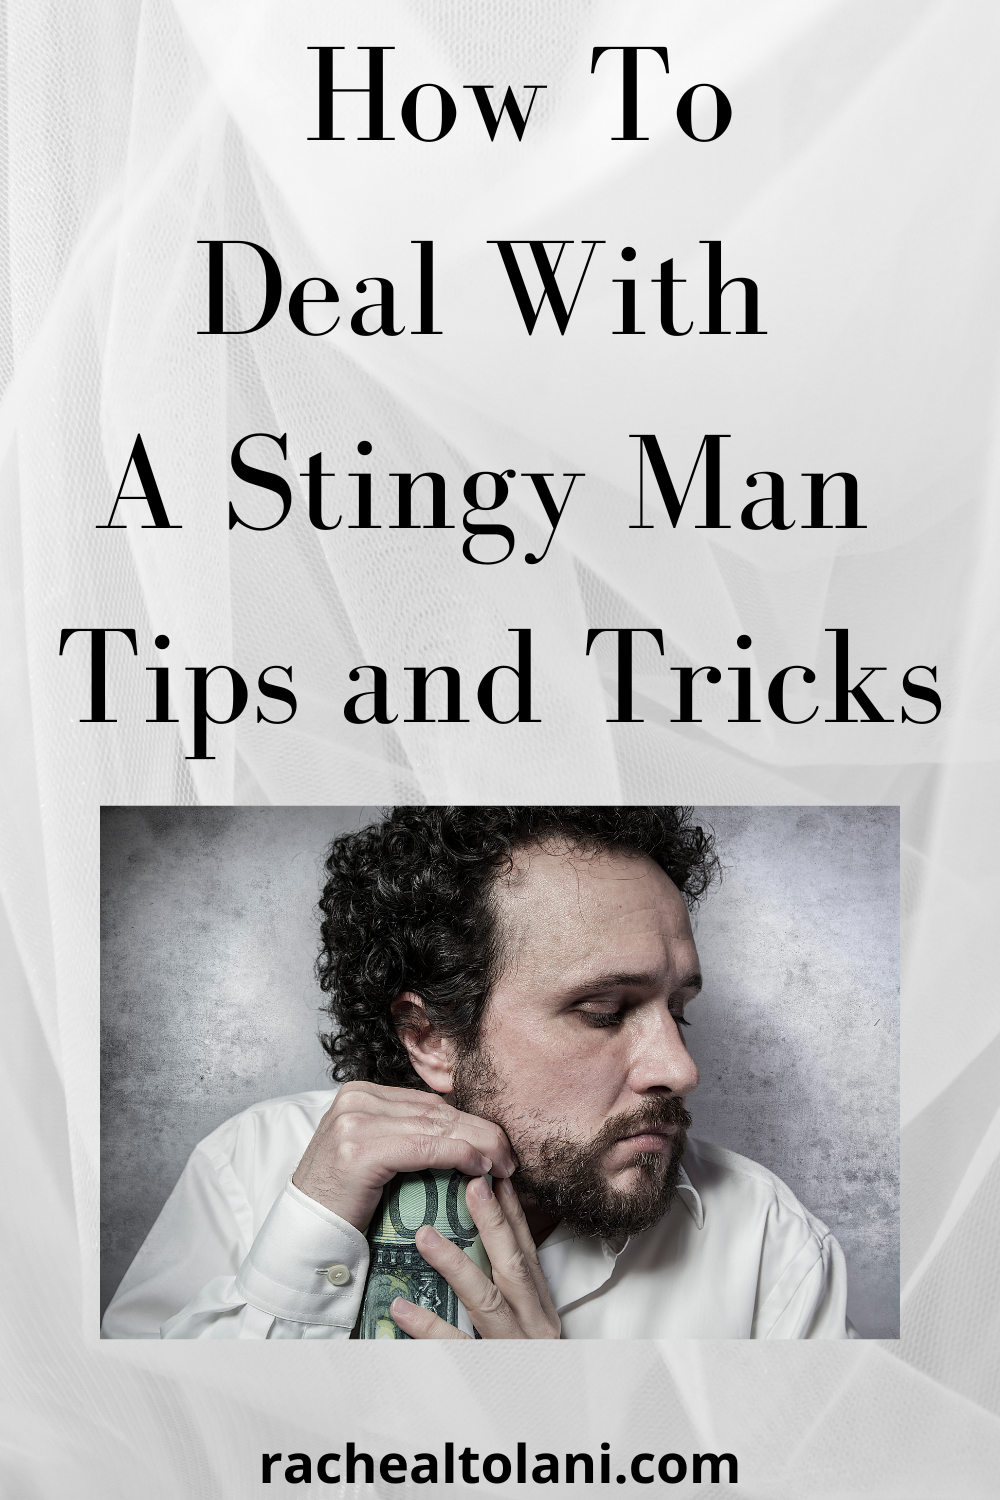 How To Deal With A Stingy Man